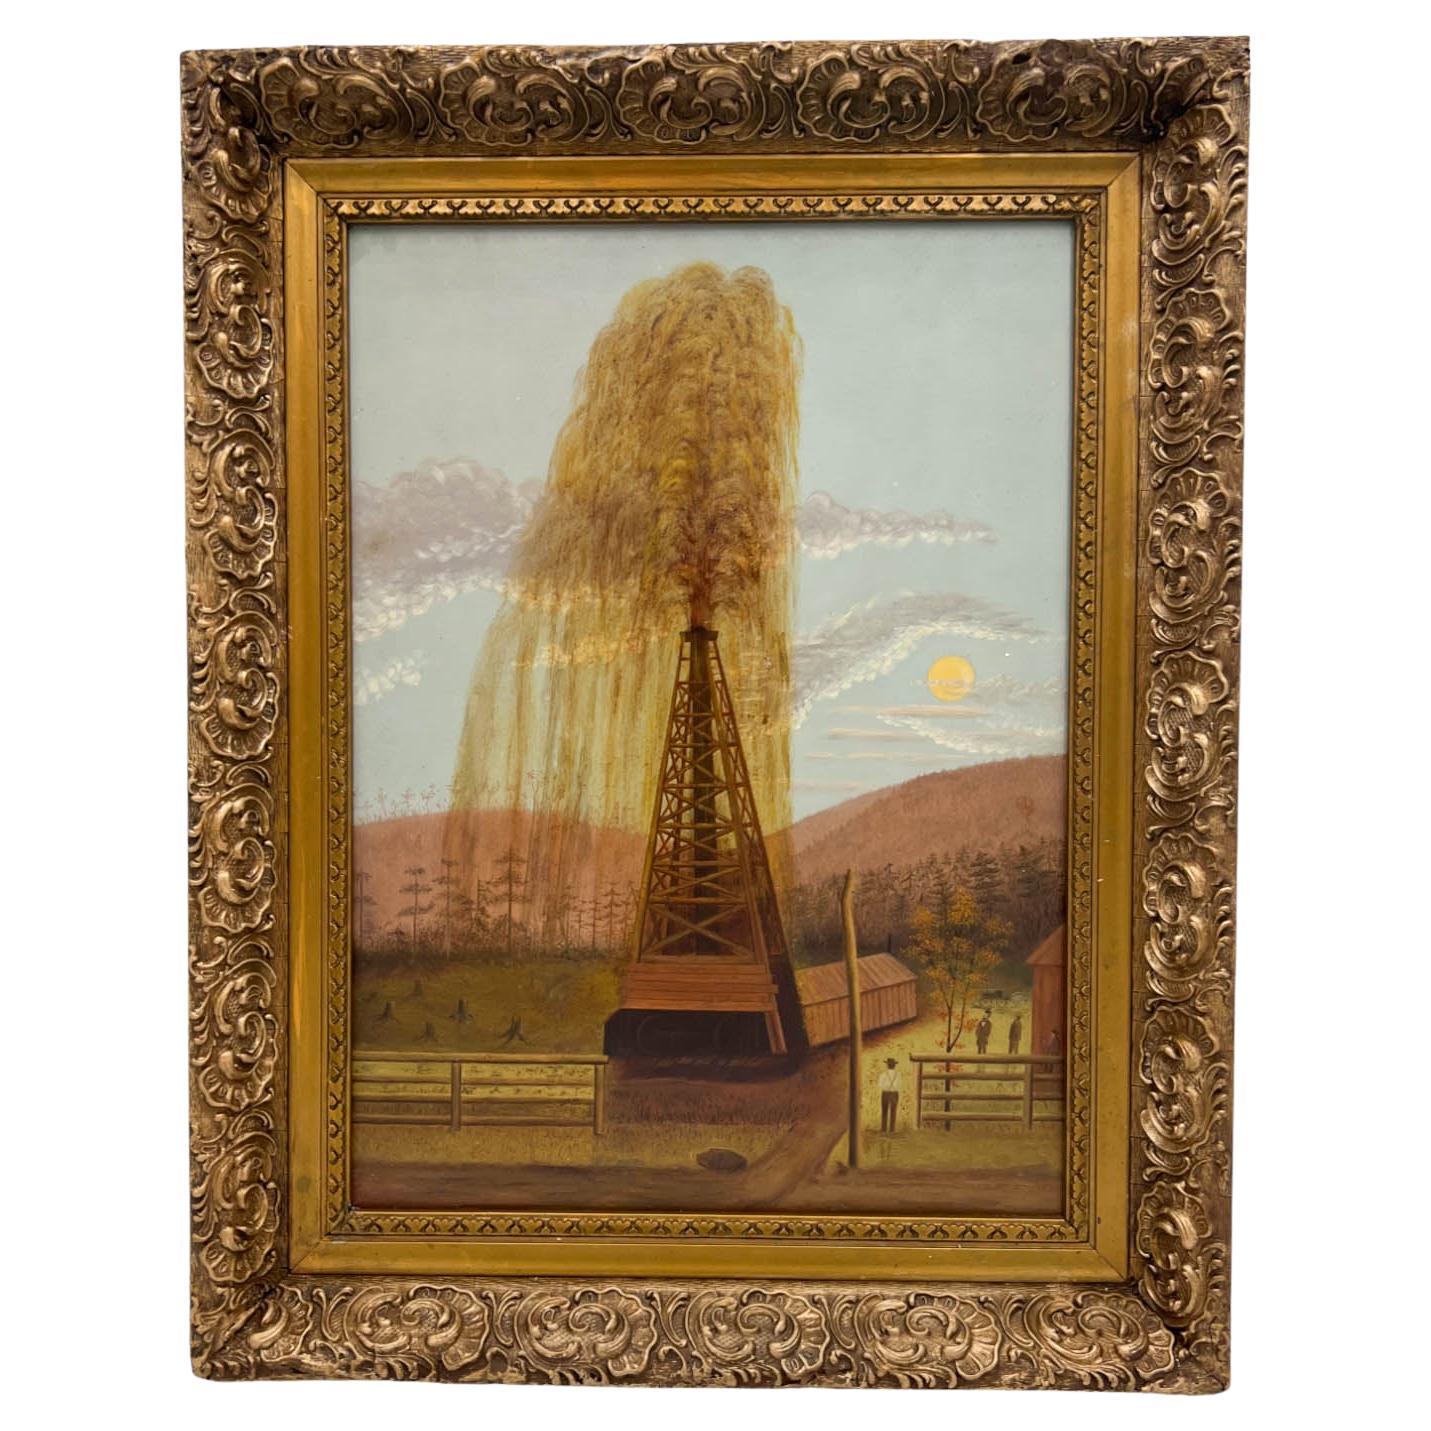 Rare Late 19th Century Oil Well Derrick Painting